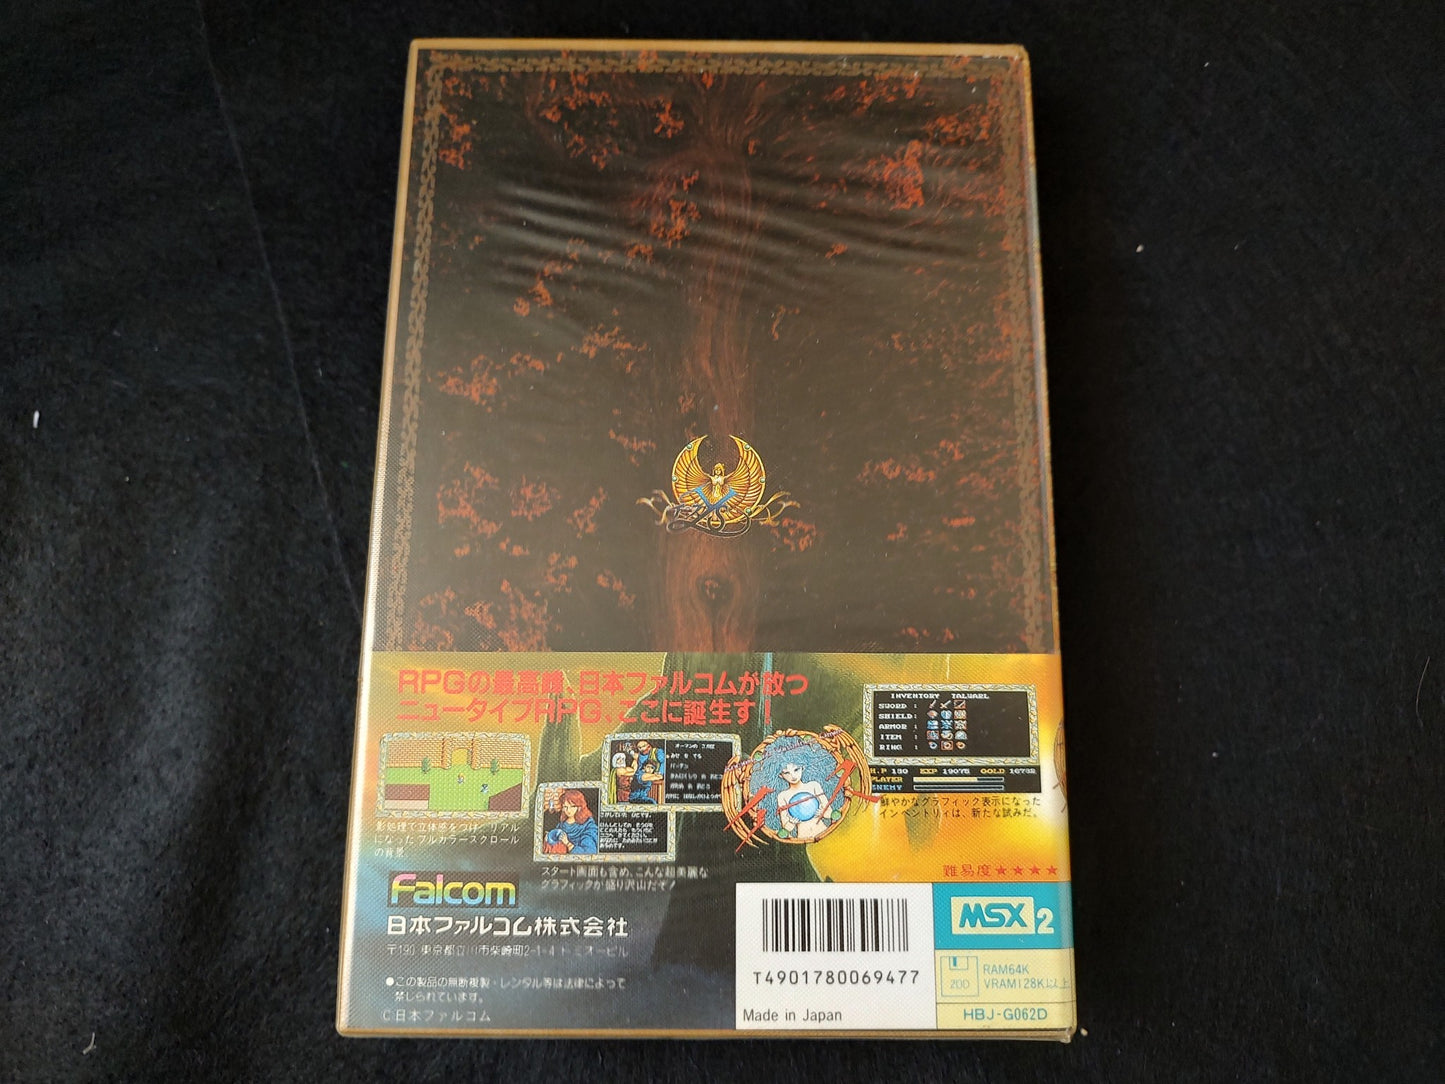 Ys - Ancient Ys Vanished - MSX MSX2 Game Disk,Manual, Boxed tested-f0617-2